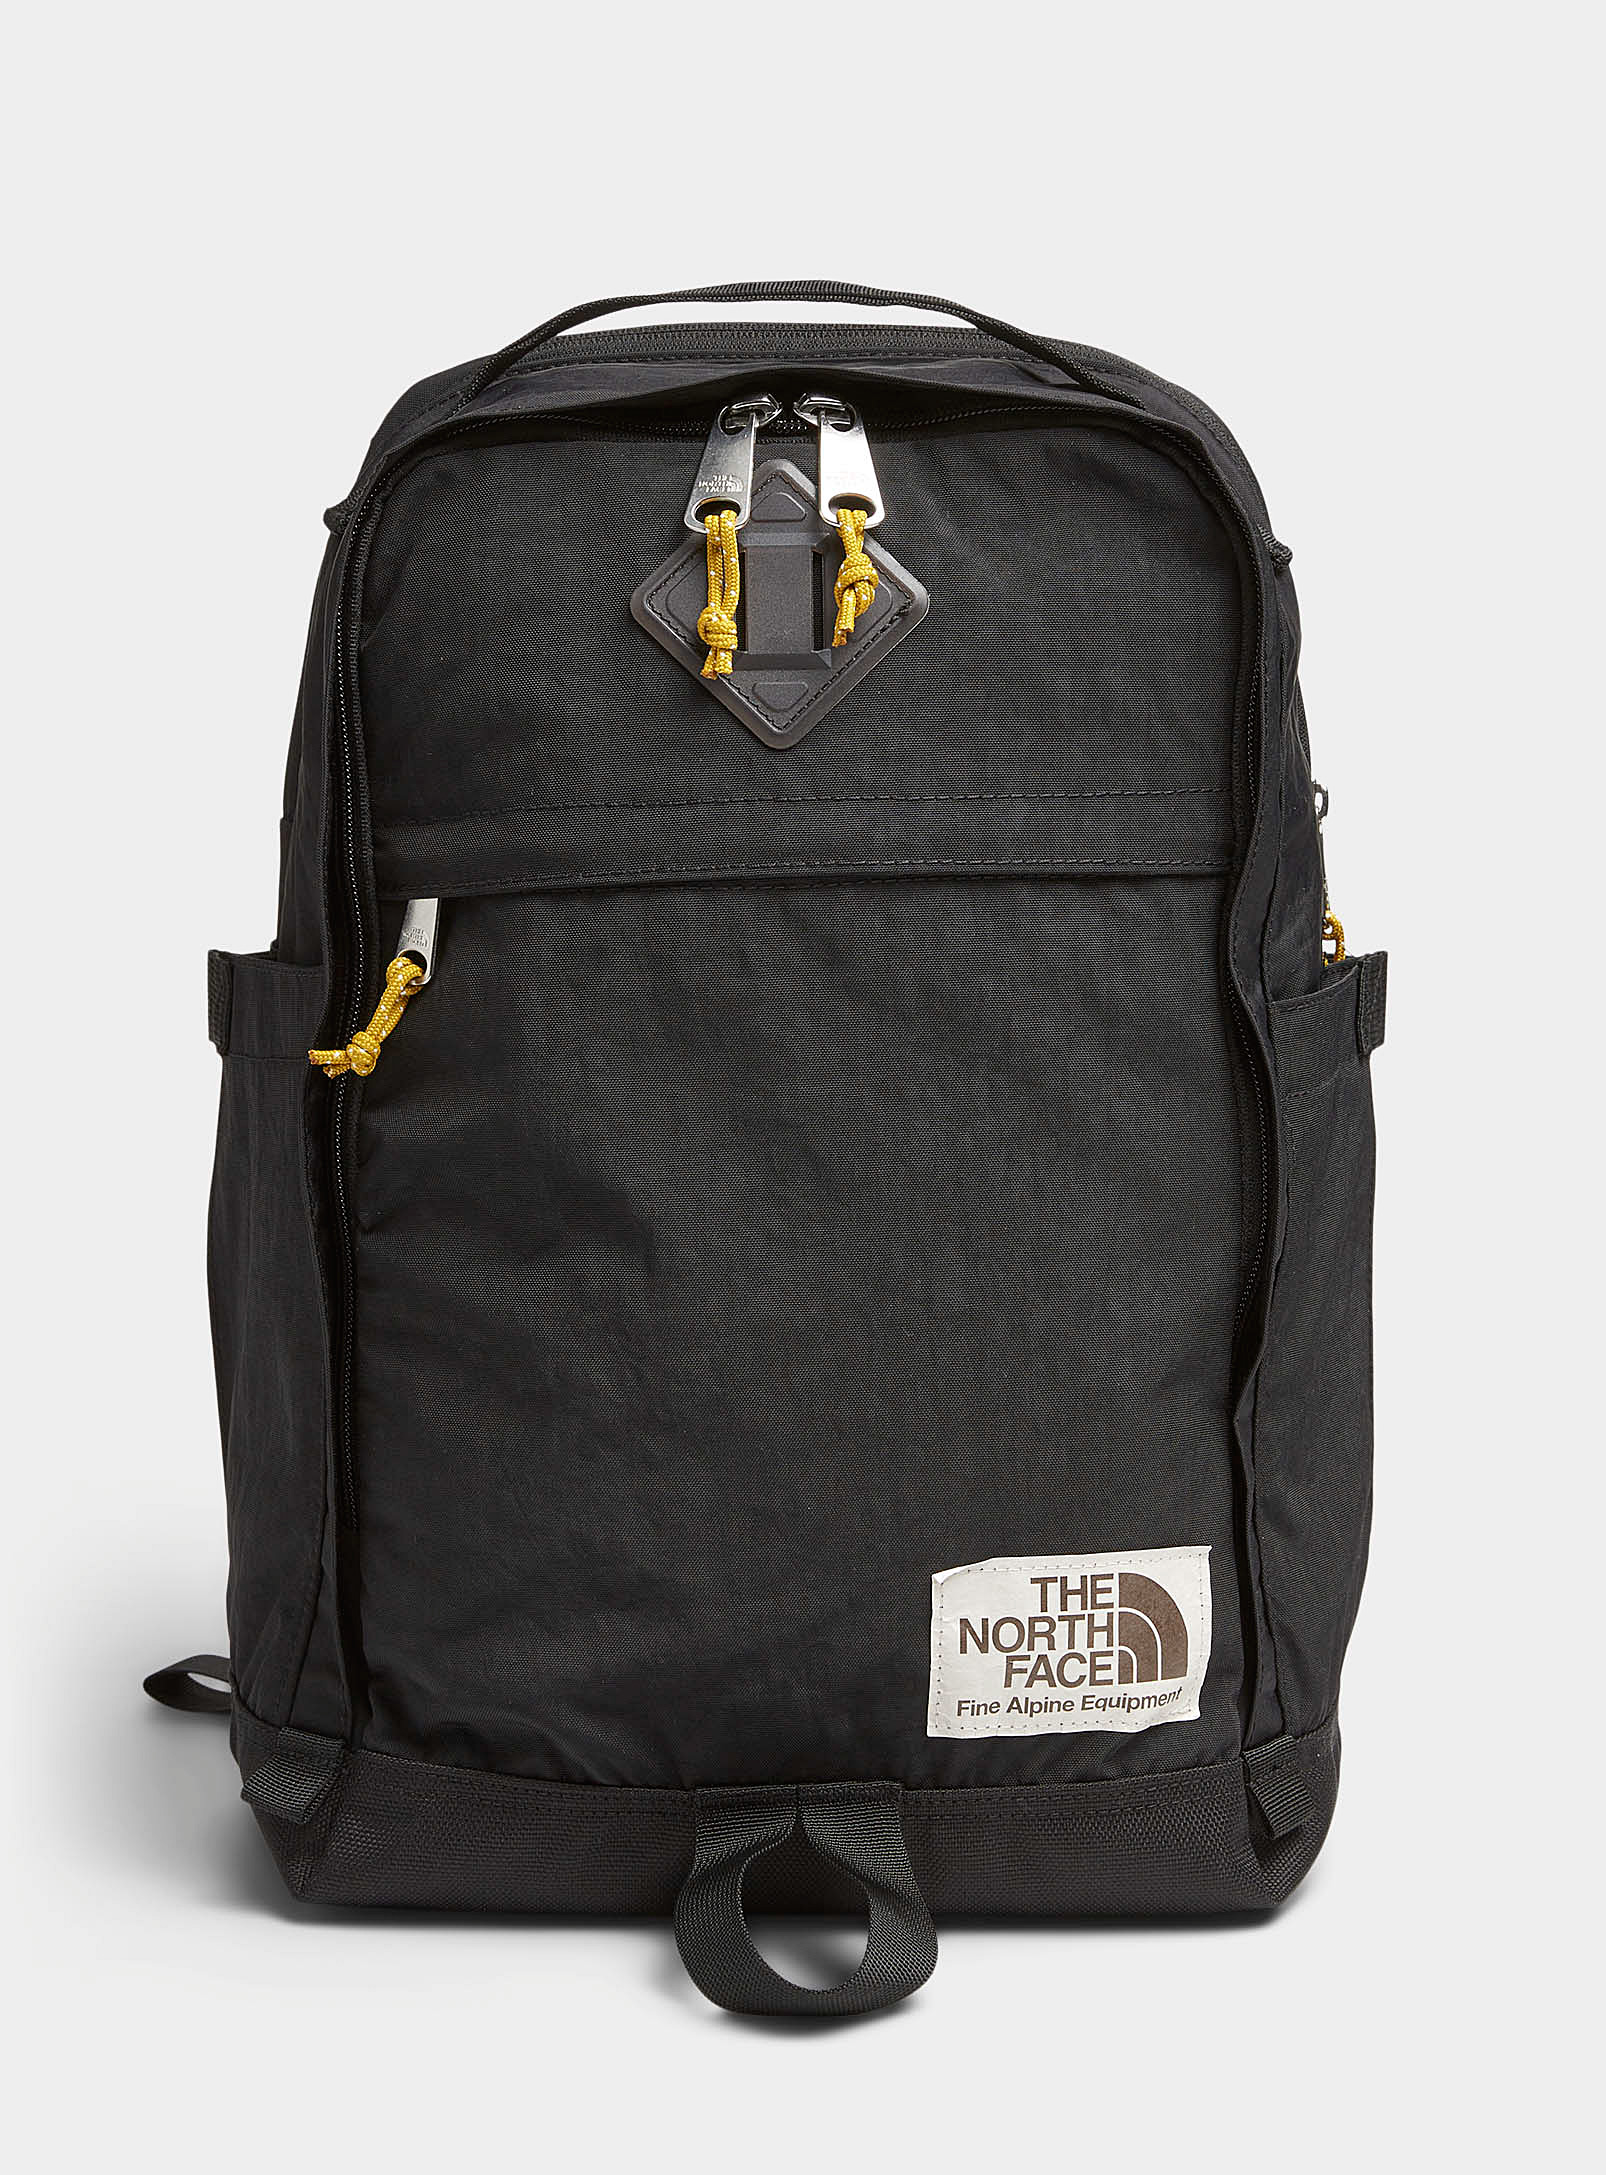 The North Face - Men's Berkeley backpack